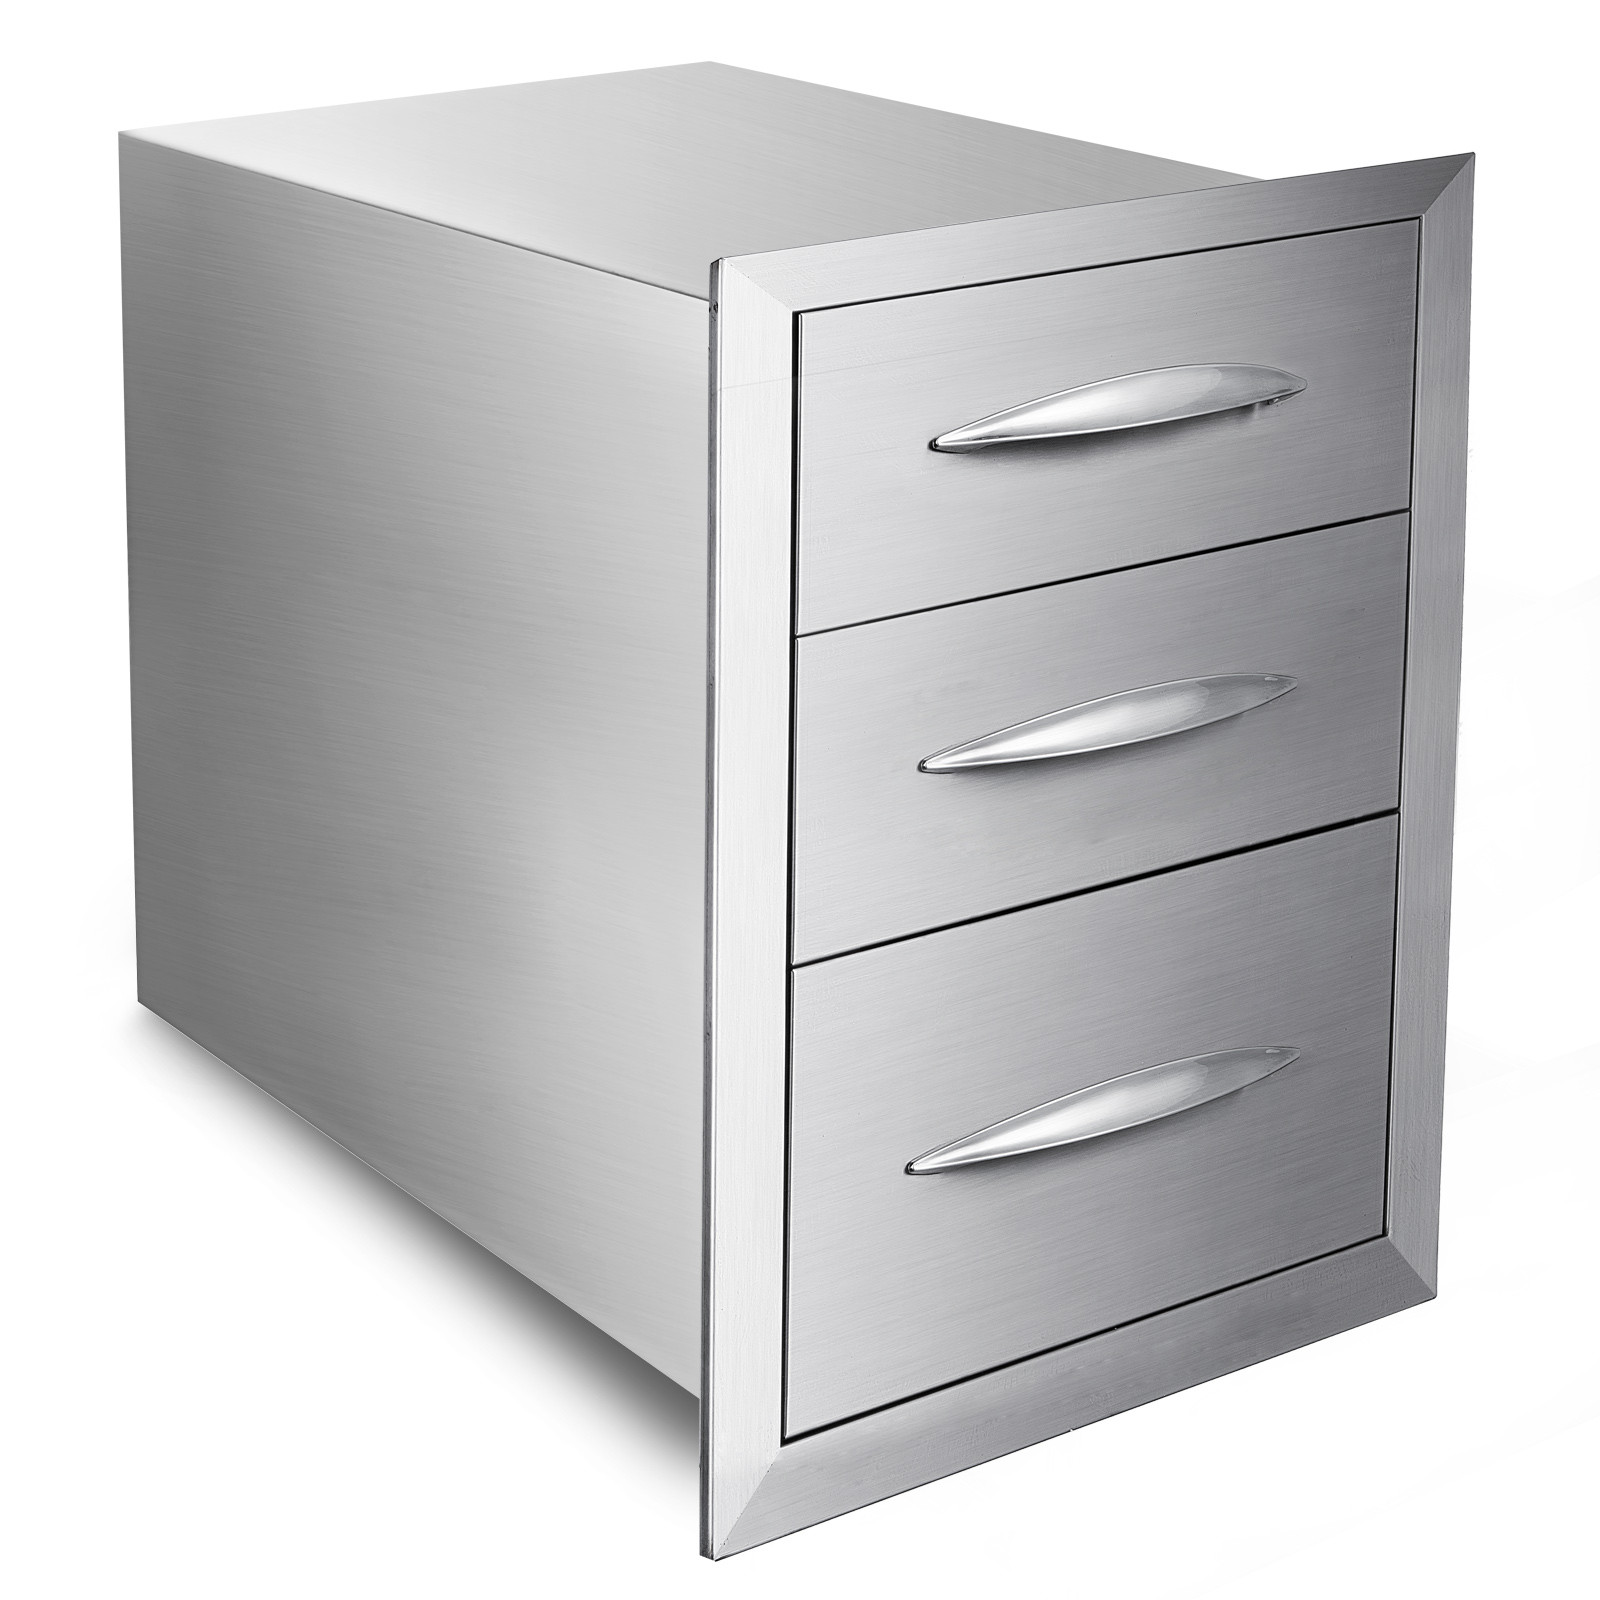 Outdoor Kitchen Drawers
 Outdoor Kitchen Drawer Door Access BBQ Drawer Stainless